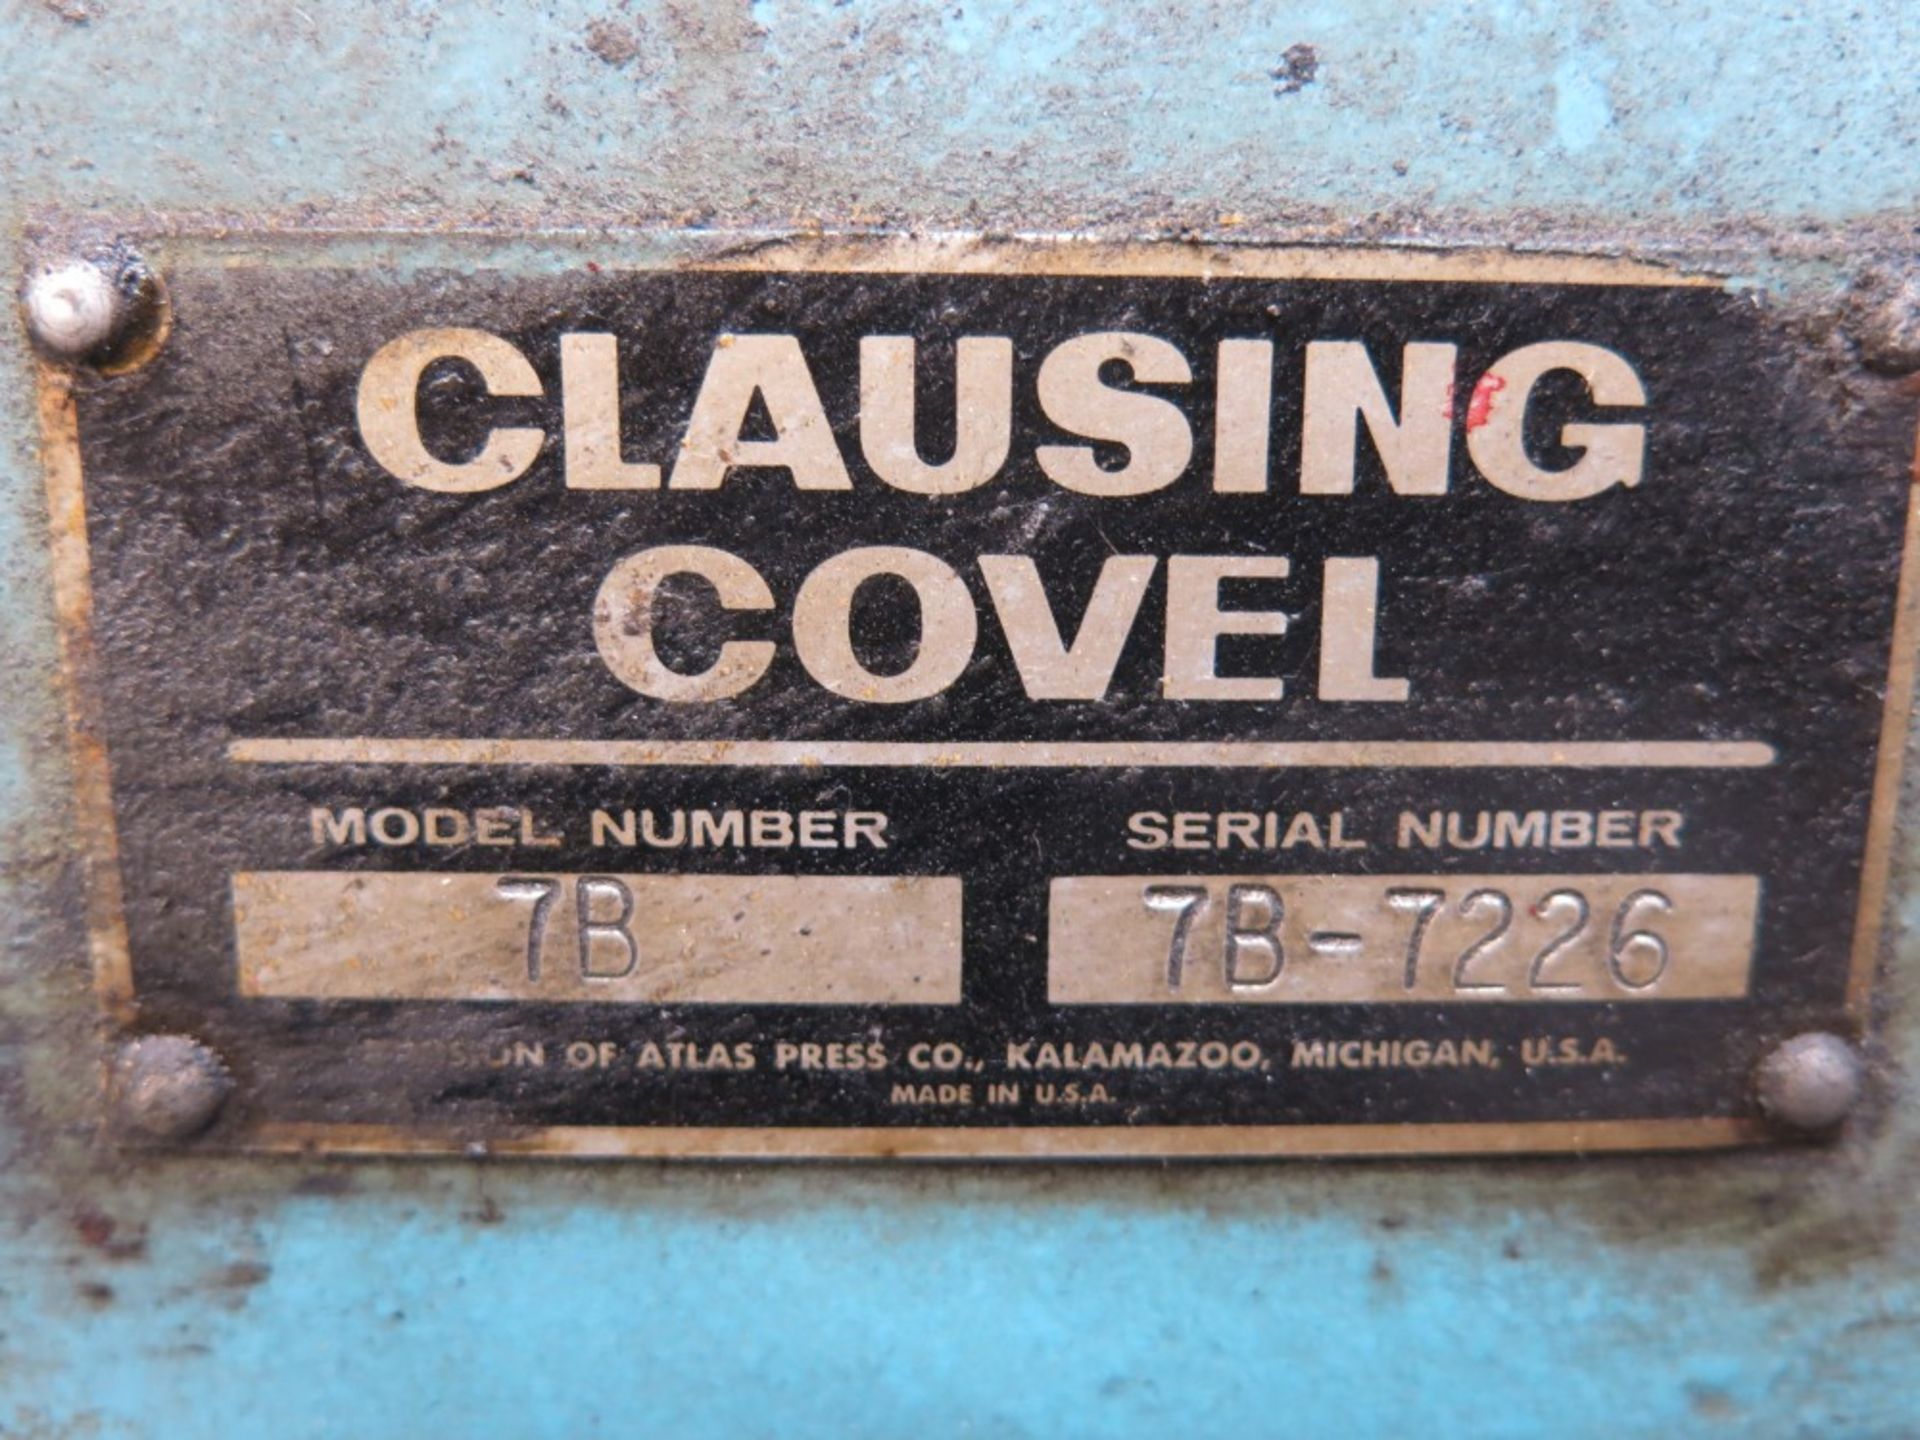 Clausing Covel Surface Grinder Model 7B - Image 3 of 3